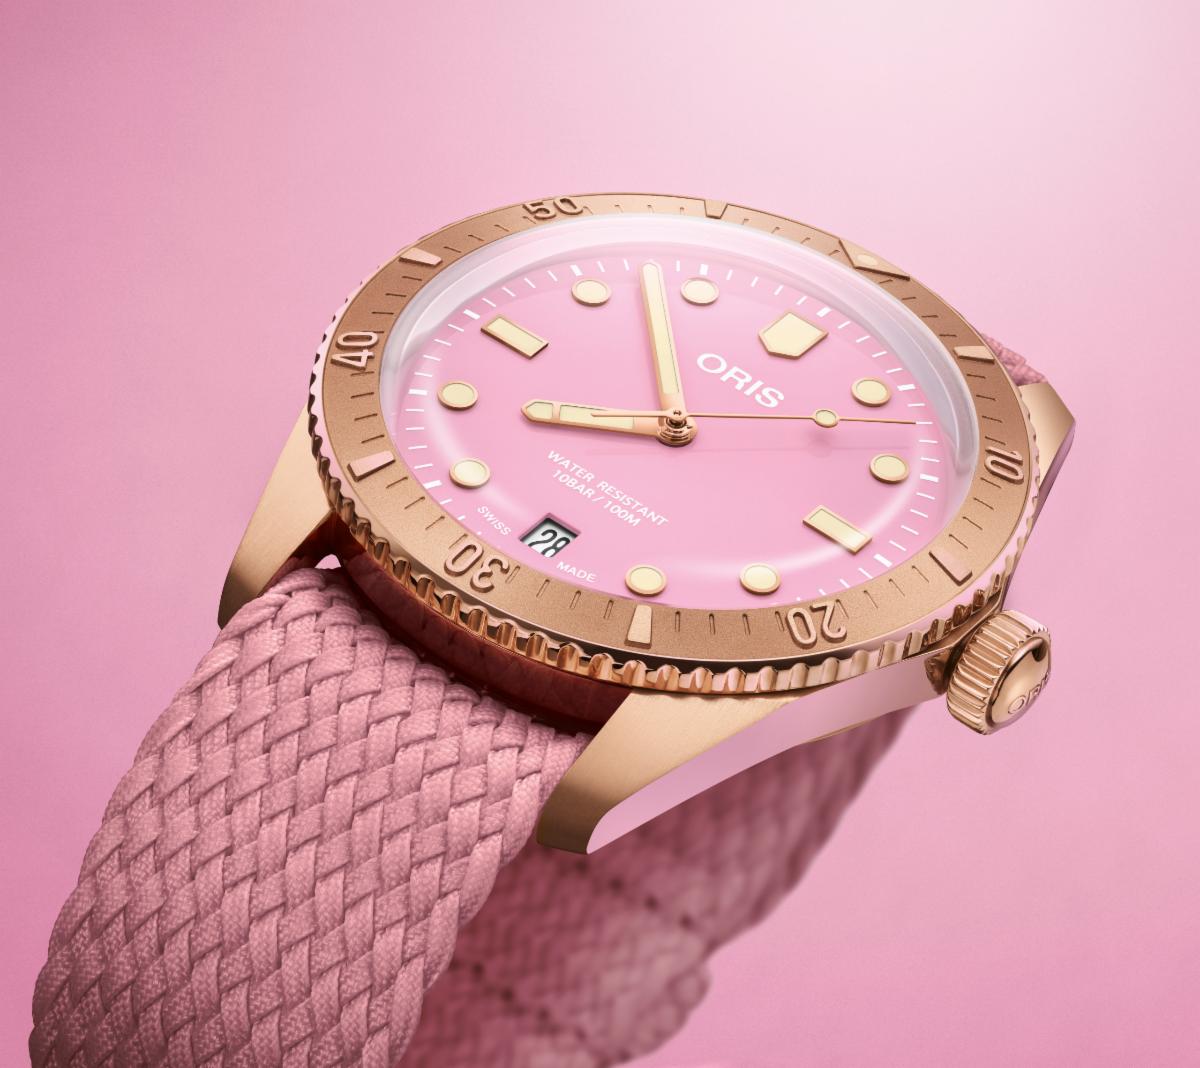 Oris Cotton Candy Divers Sixty-Five bronze watches with perlon straps made from recycled materials. 